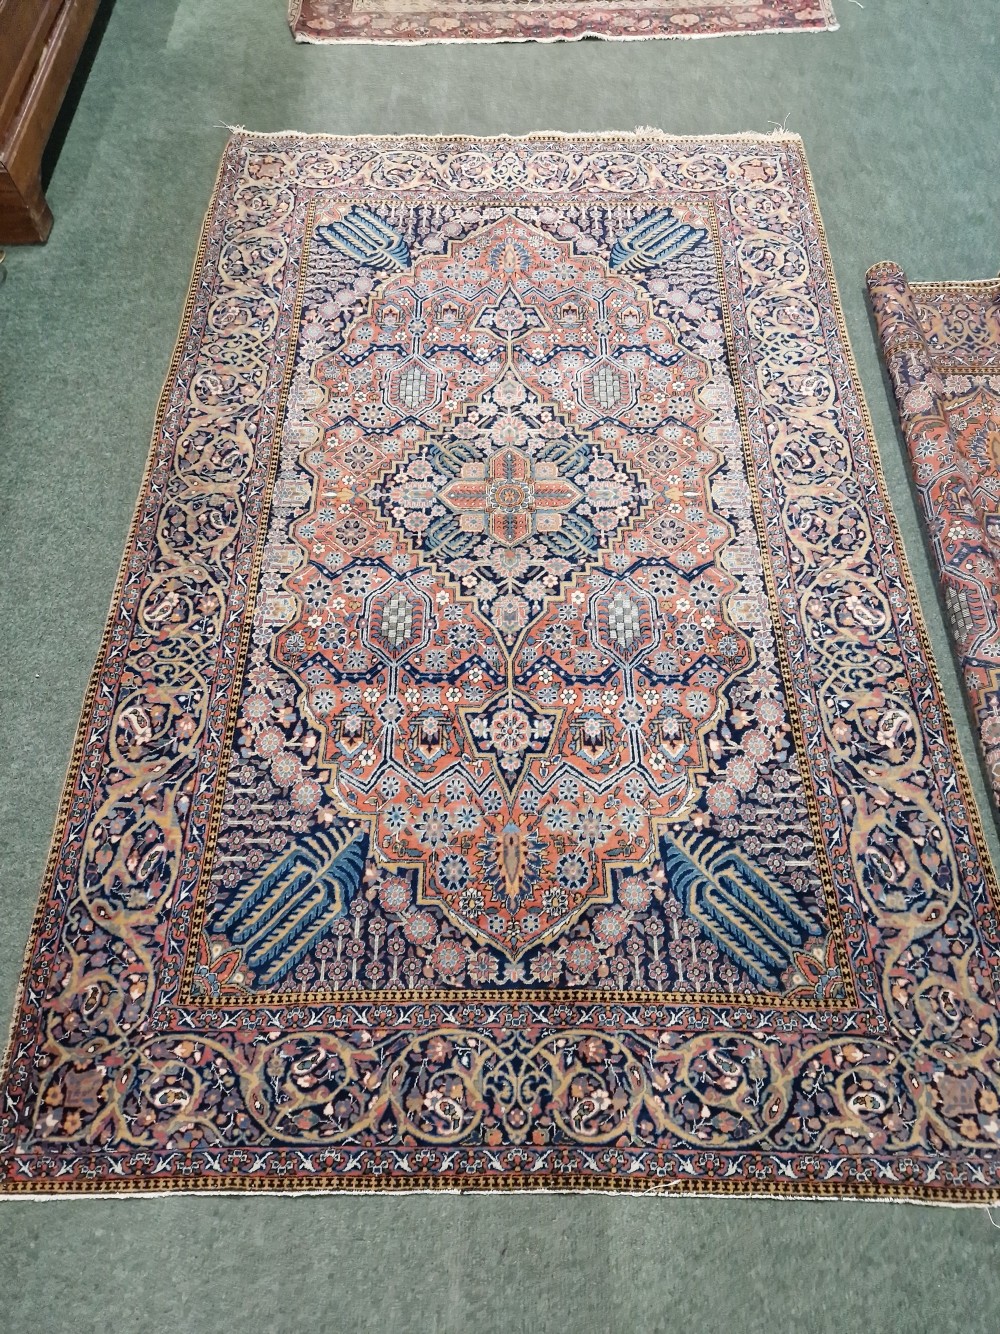 A PAIR OF ANTIQUE PERSIAN KASHAN RUGS. 298 x 132cms - Image 9 of 12